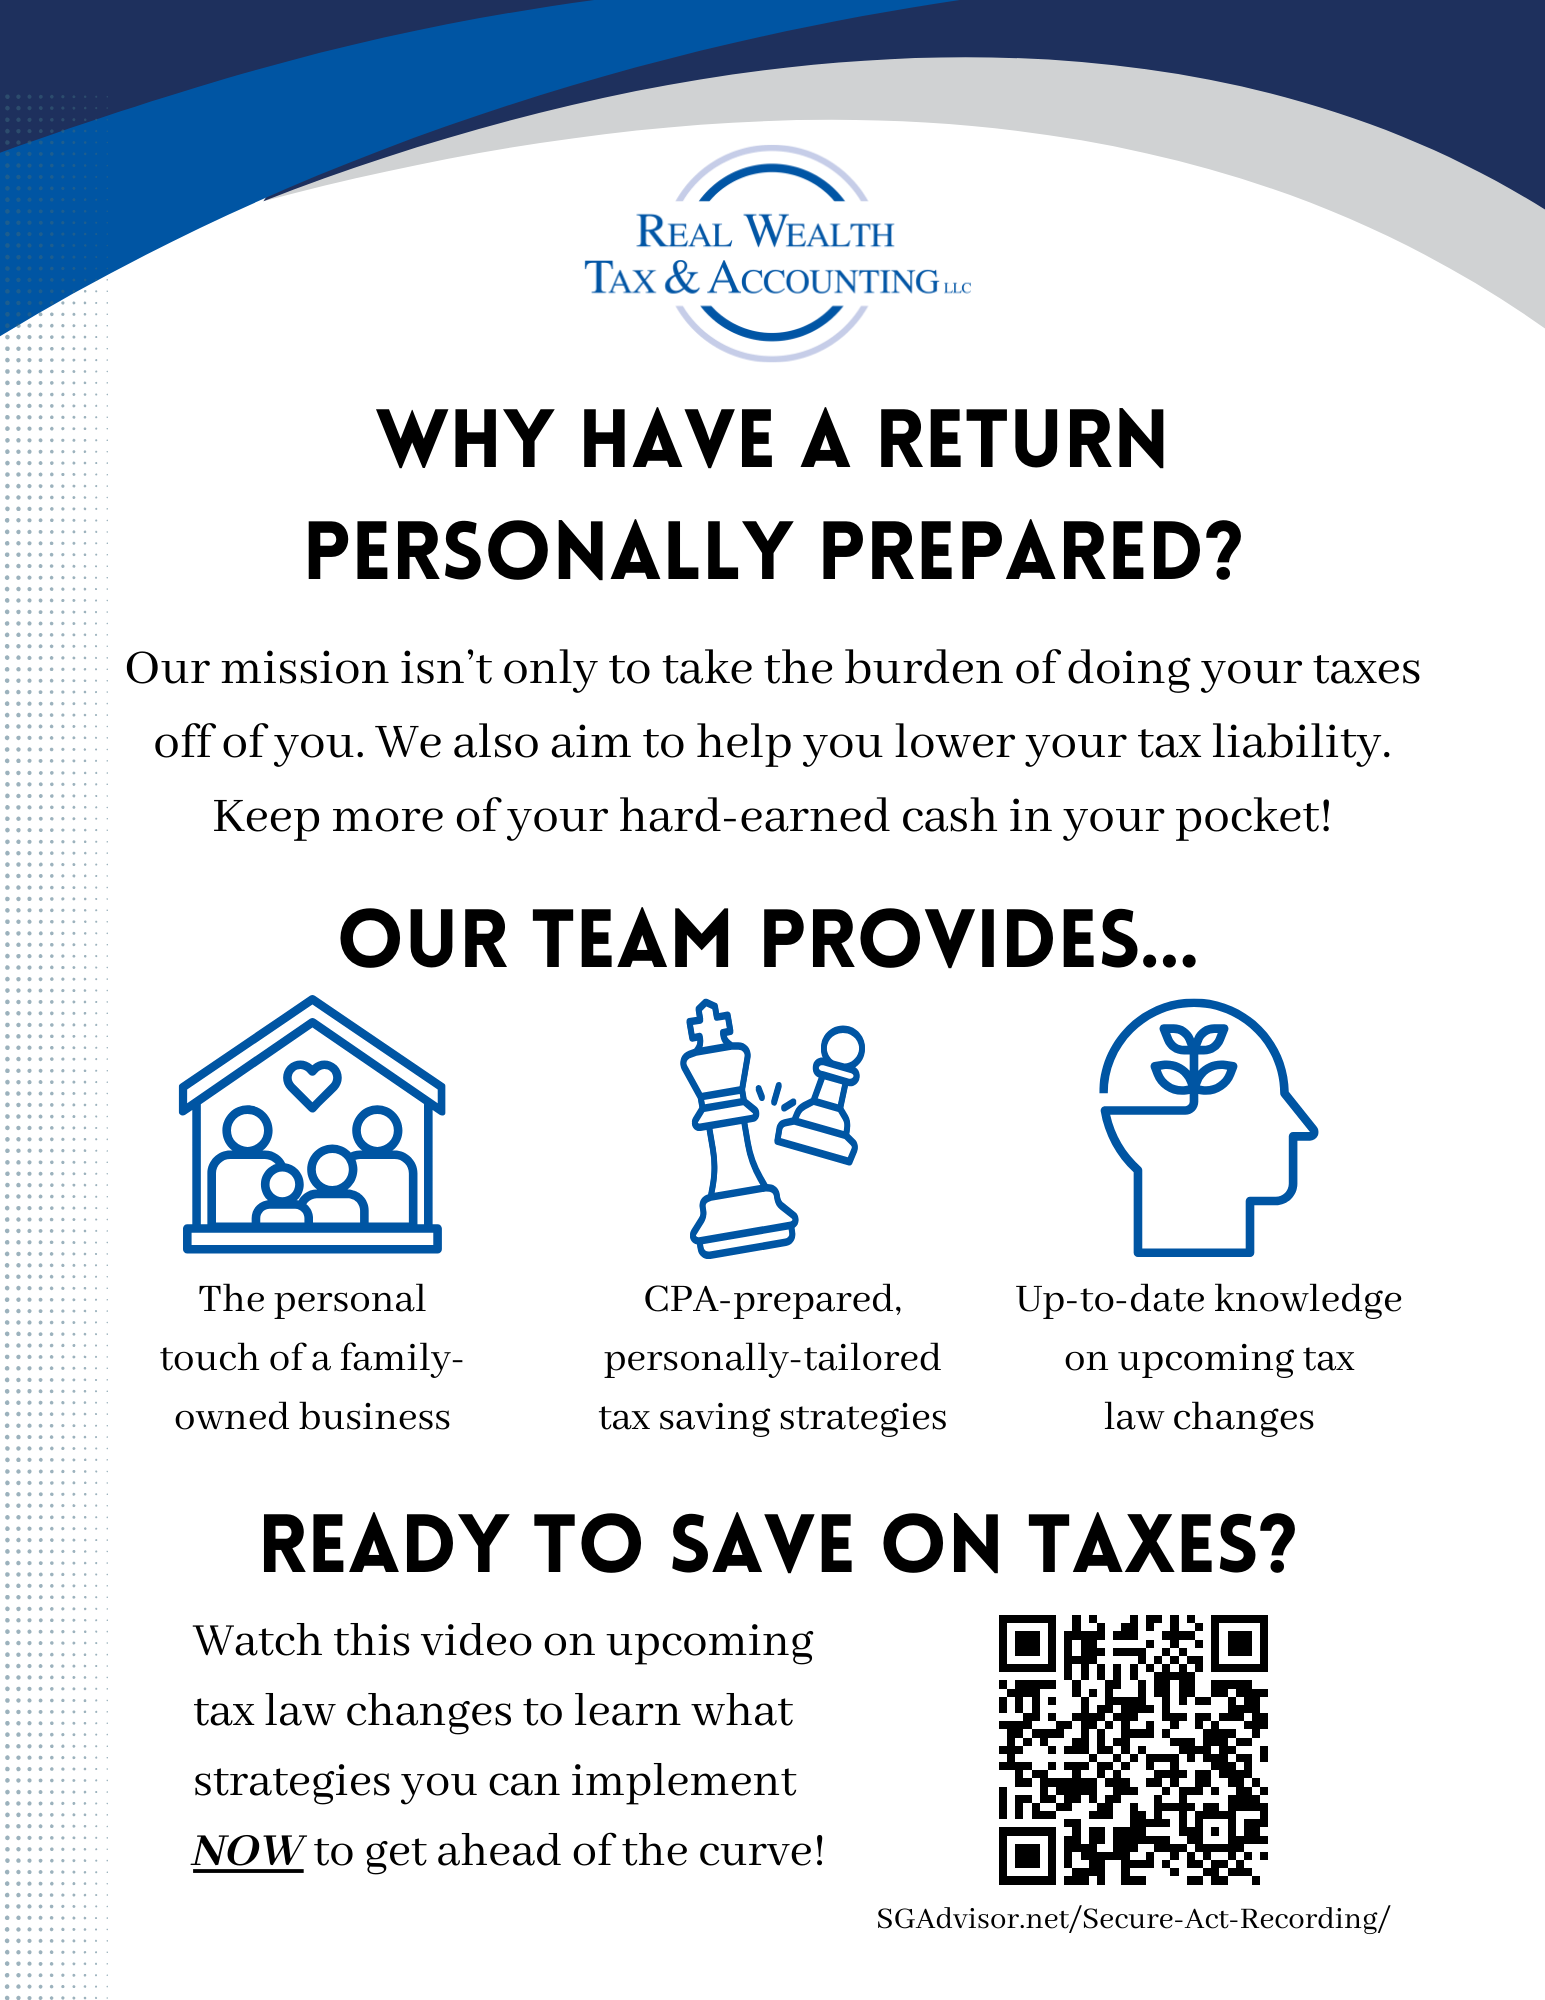 Why have a return personally prepared? Our team provides the personal touch of a family-owned business, CPA prepared, personally-tailors tax saving strategies, and up-to-date knowledge on upcoming tax law changes